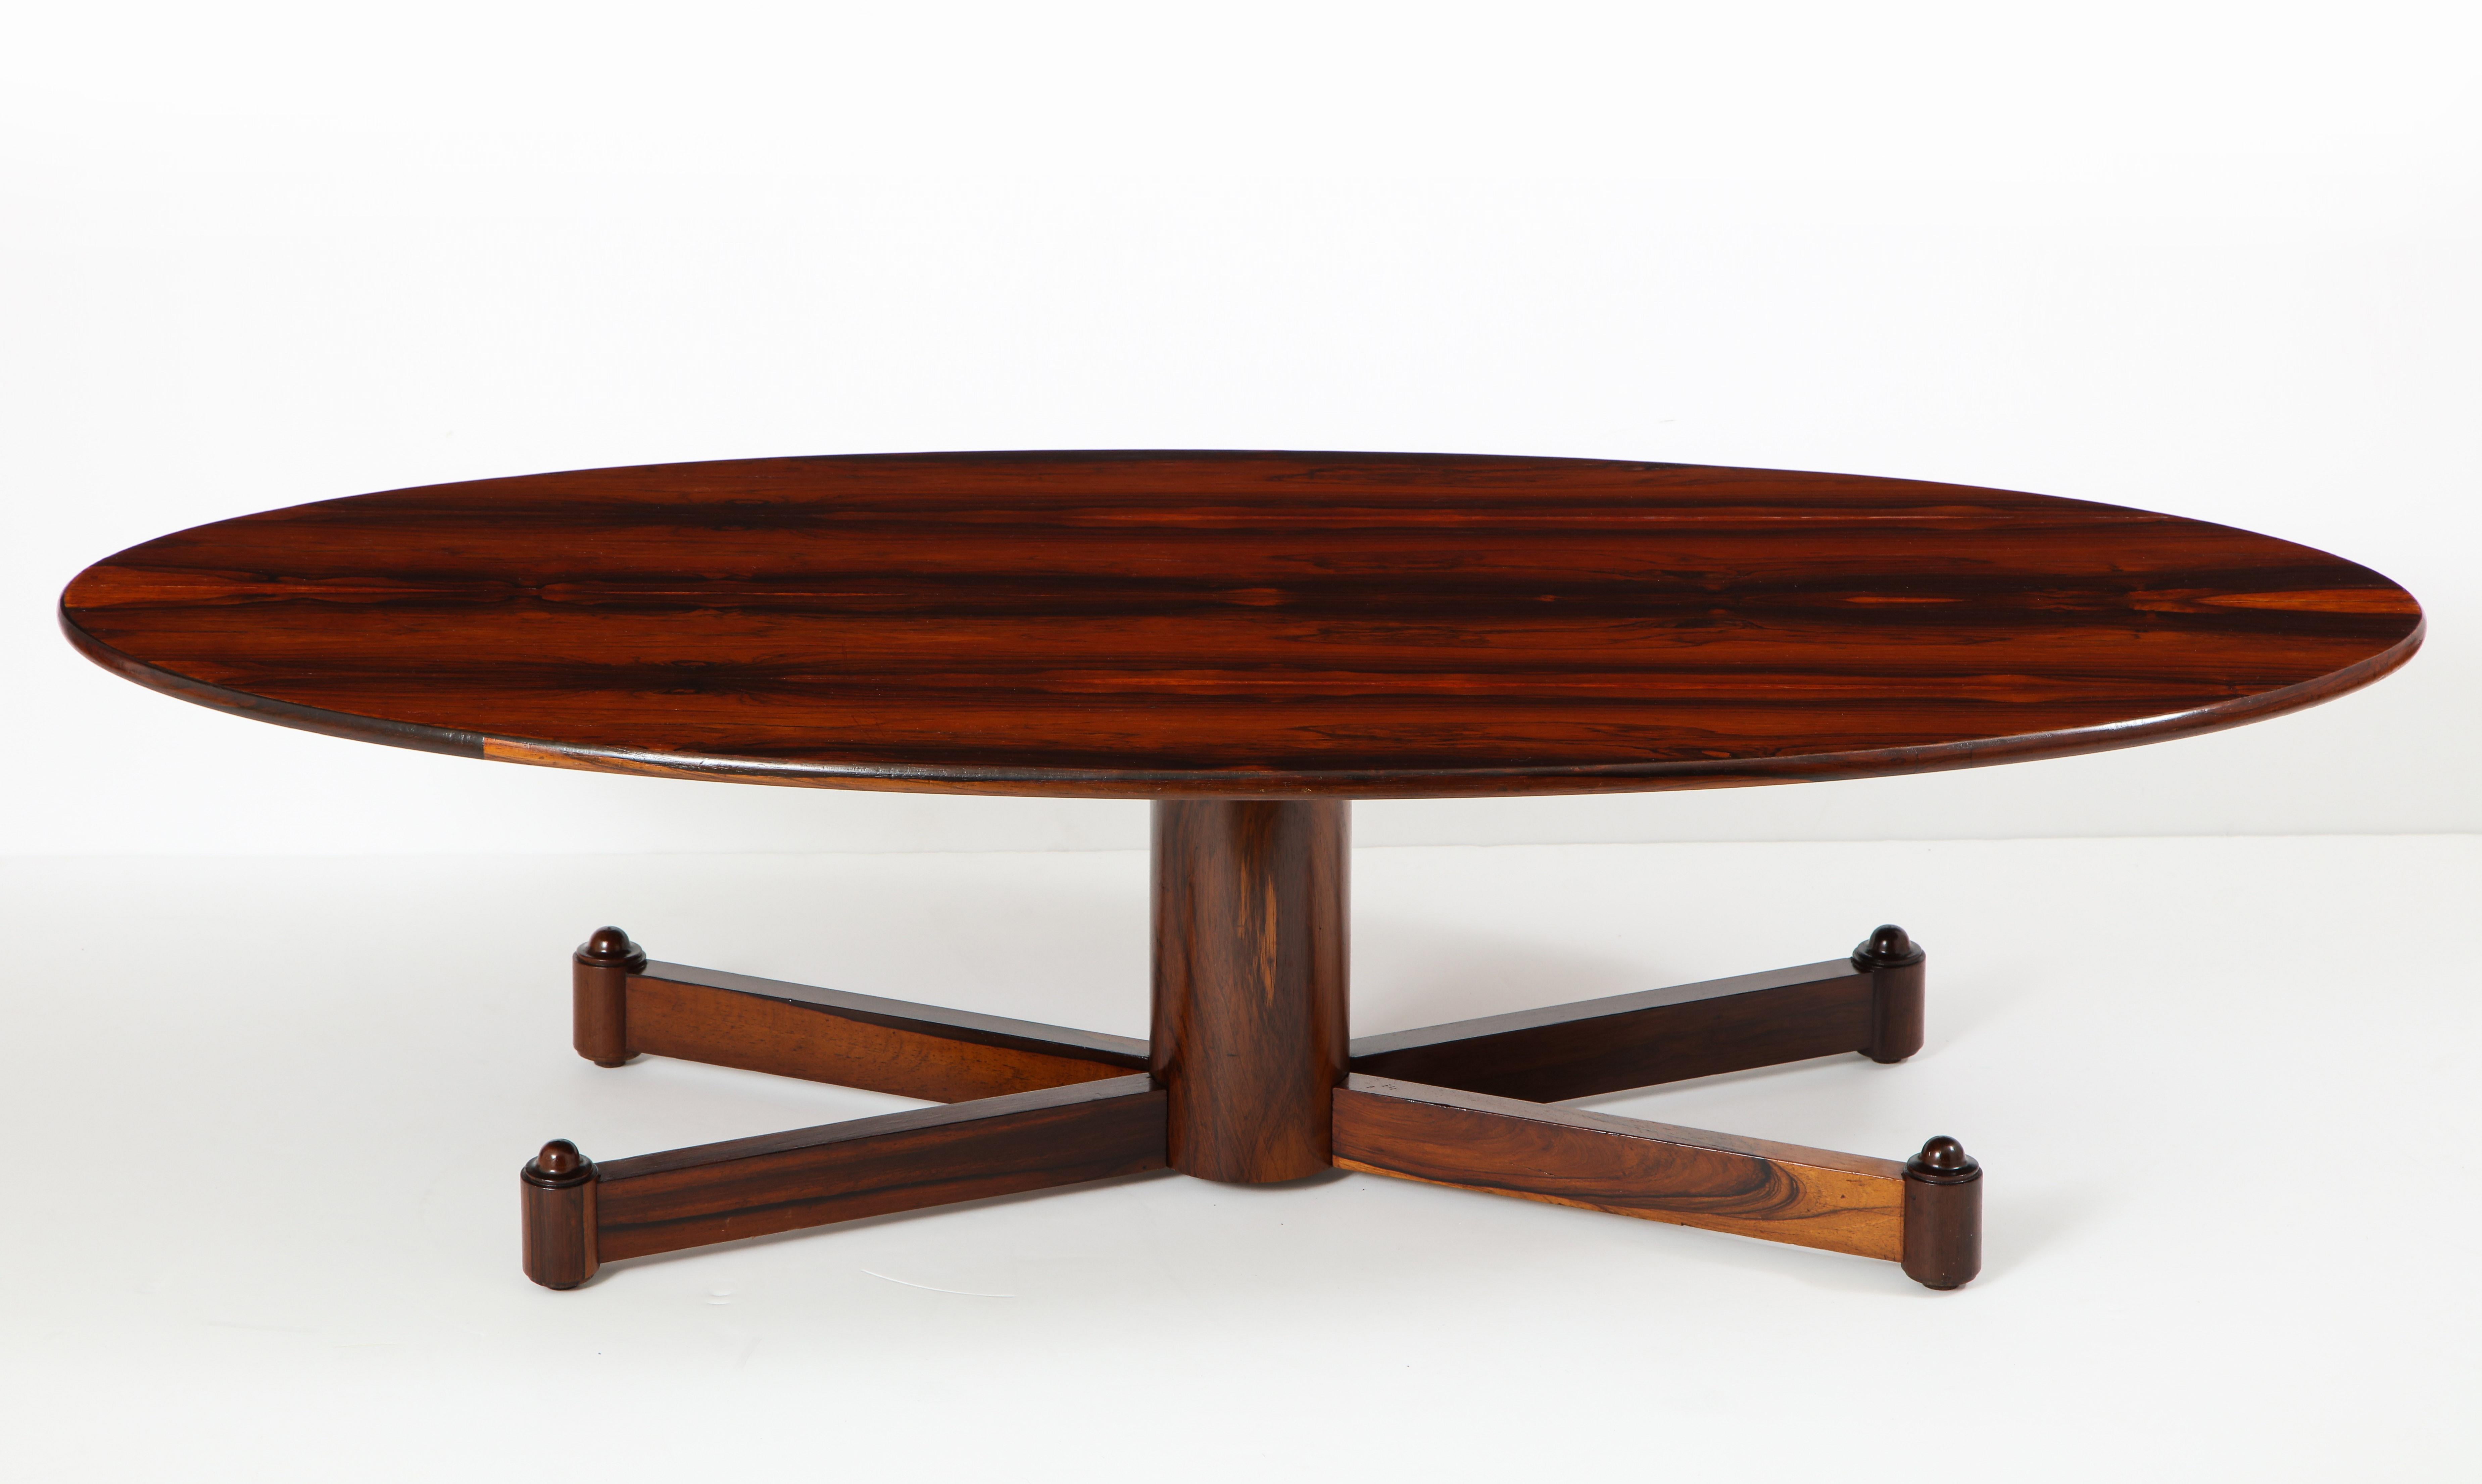 Brazilian Mid-Century Modern Wood Oval Coffee Table, Brazil 1950s

This 1950s elegantly elongated oval coffee table is characteristically Brazilian Mid-Century Modern. It consists of a naval plywood top nicely covered in highly figured wood veneer